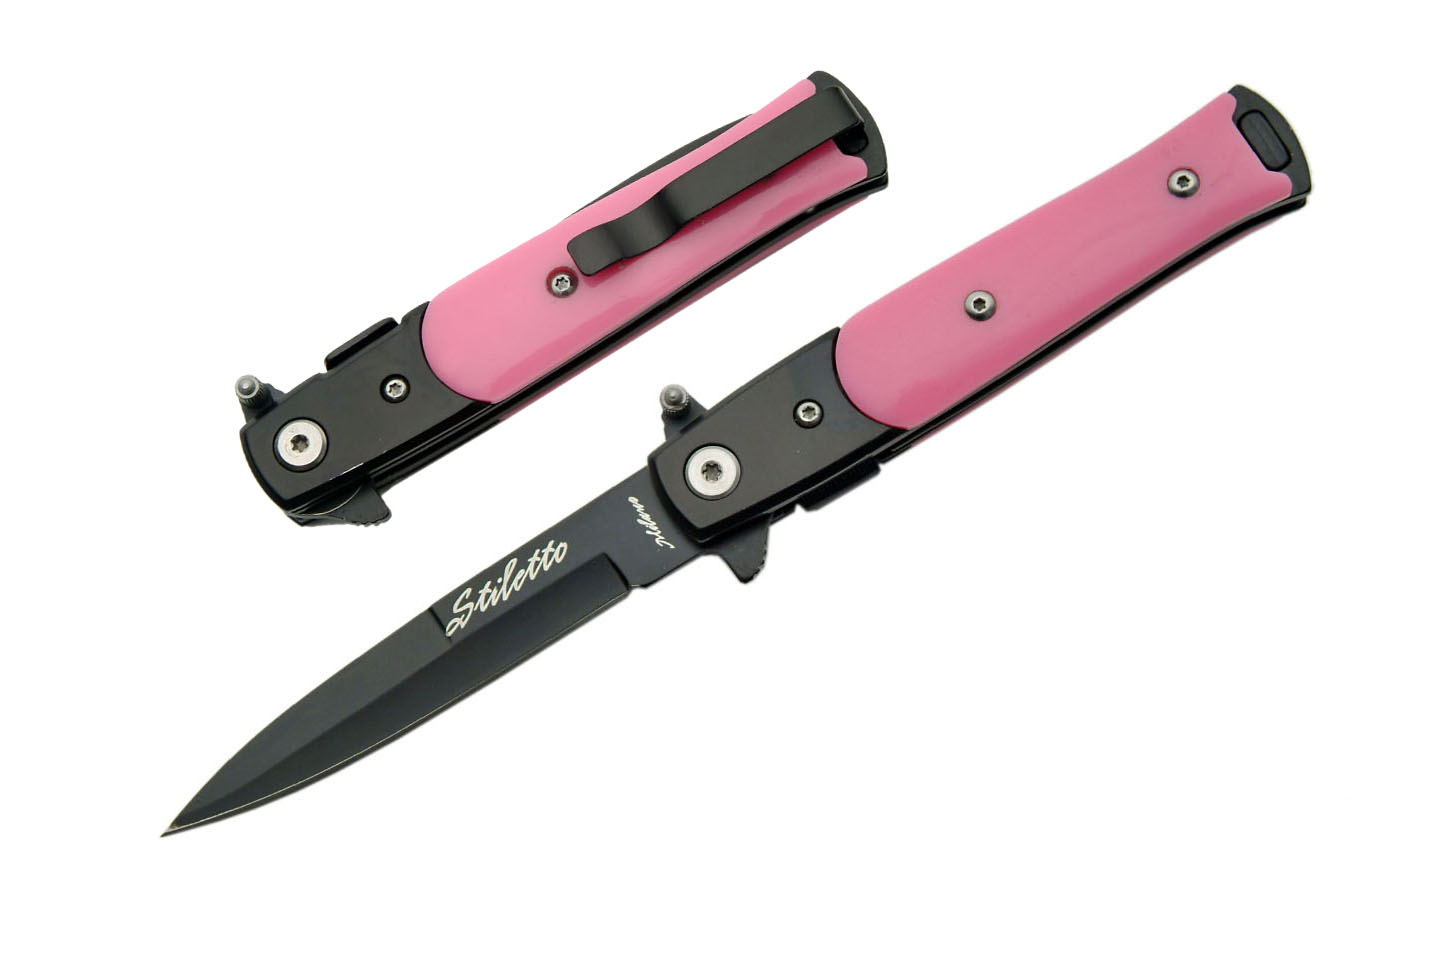 Smith & Wesson Pink Handle Knife